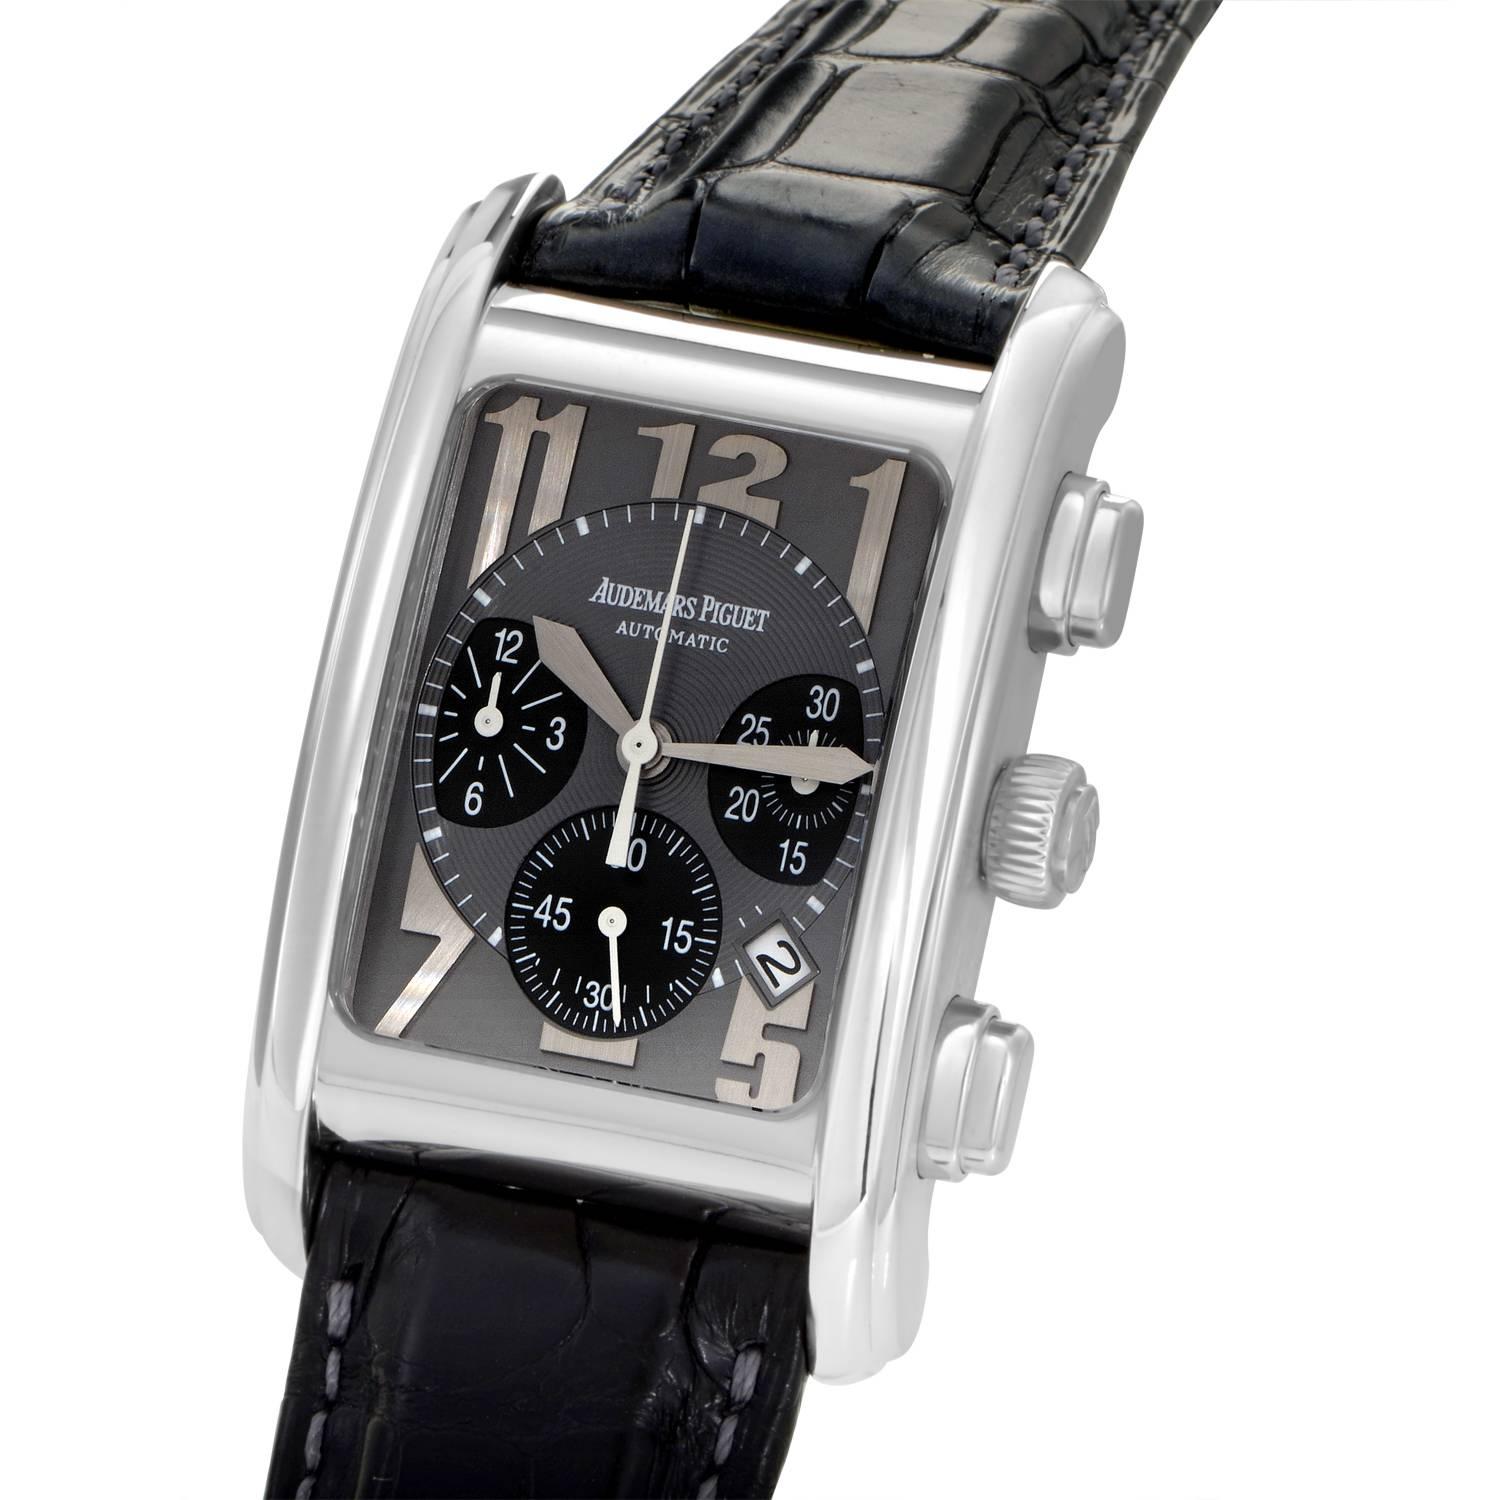 Audemars Piguet automatic stainless steel wristwatch on a black crocodile leather strap. Watch displays hours, minutes, small seconds, date, and a chronograph feature on a slate gray dial.